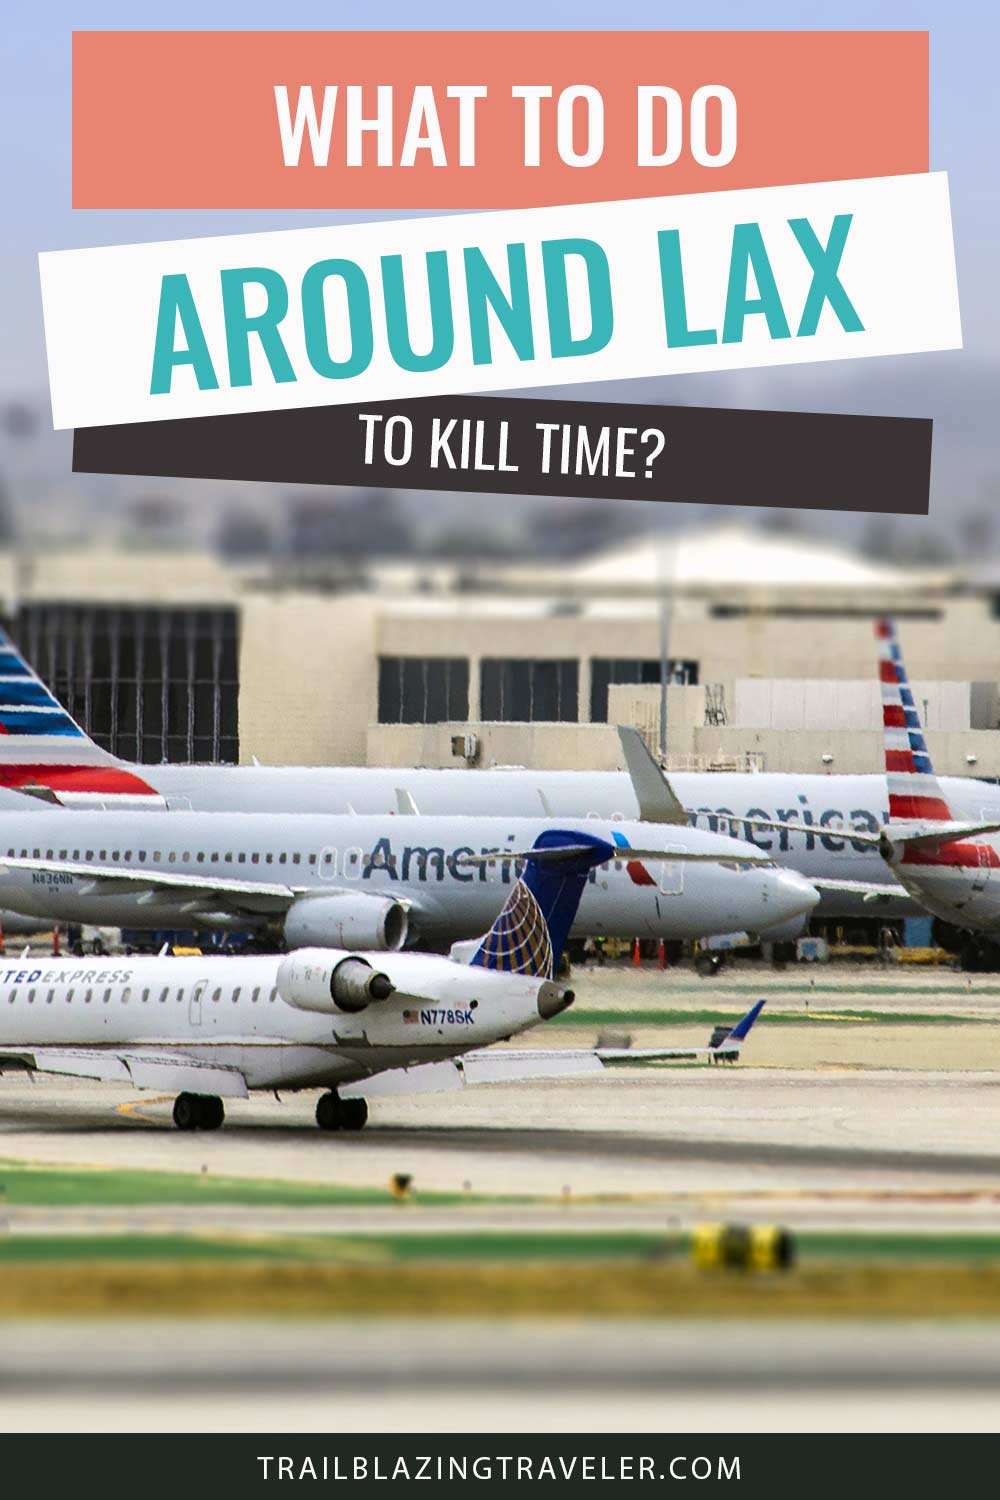 Airplanes at a Airport - What To Do Around Lax To Kill Time?